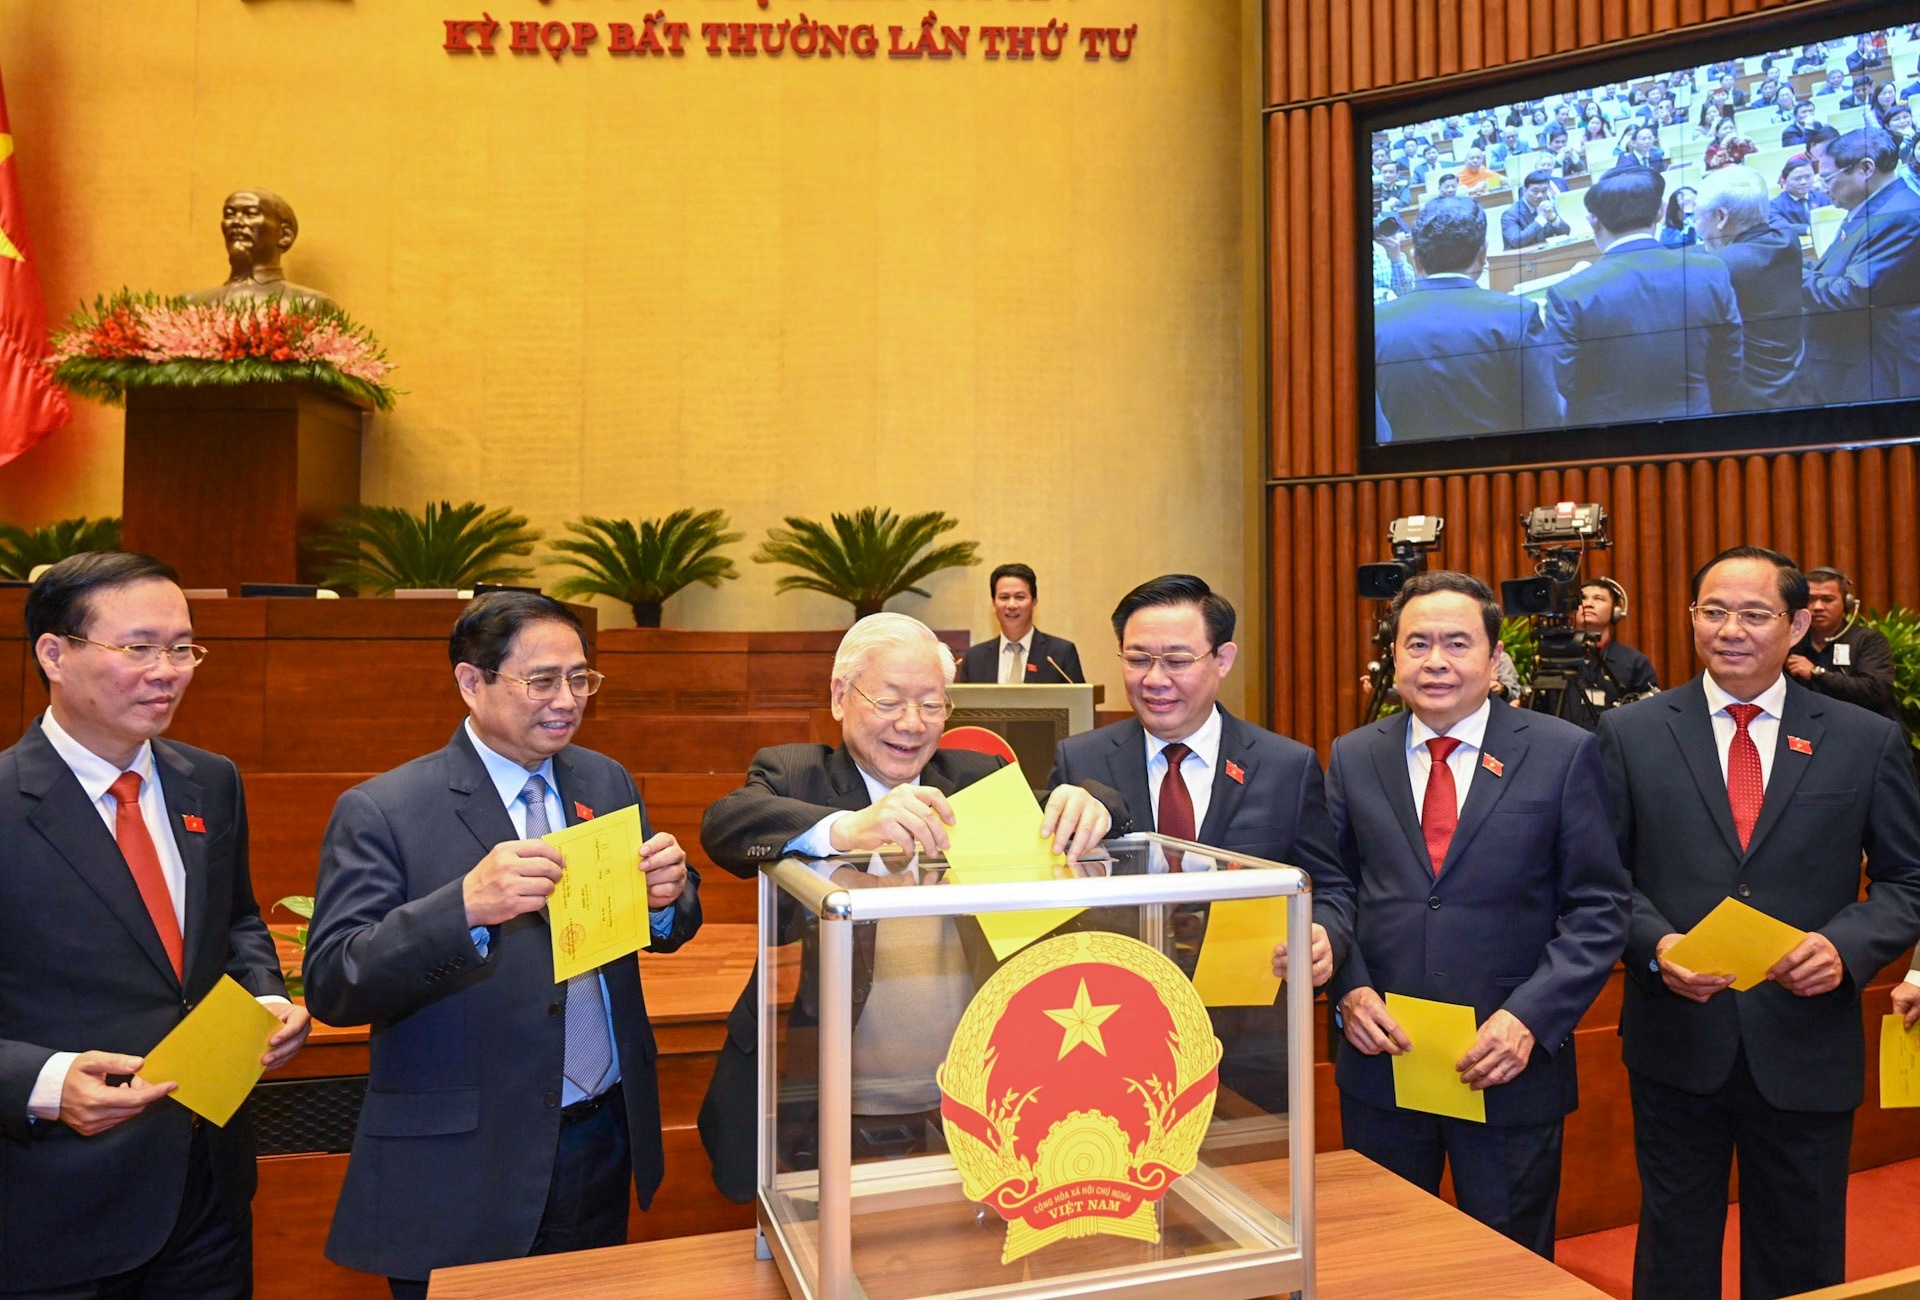 Vietnamese leaders and high-ranking officials cast their votes for the new state president during the fourth extraordinary session of the National Assembly in Hanoi, March 2, 2023. Photo: Gia Han / Tuoi Tre